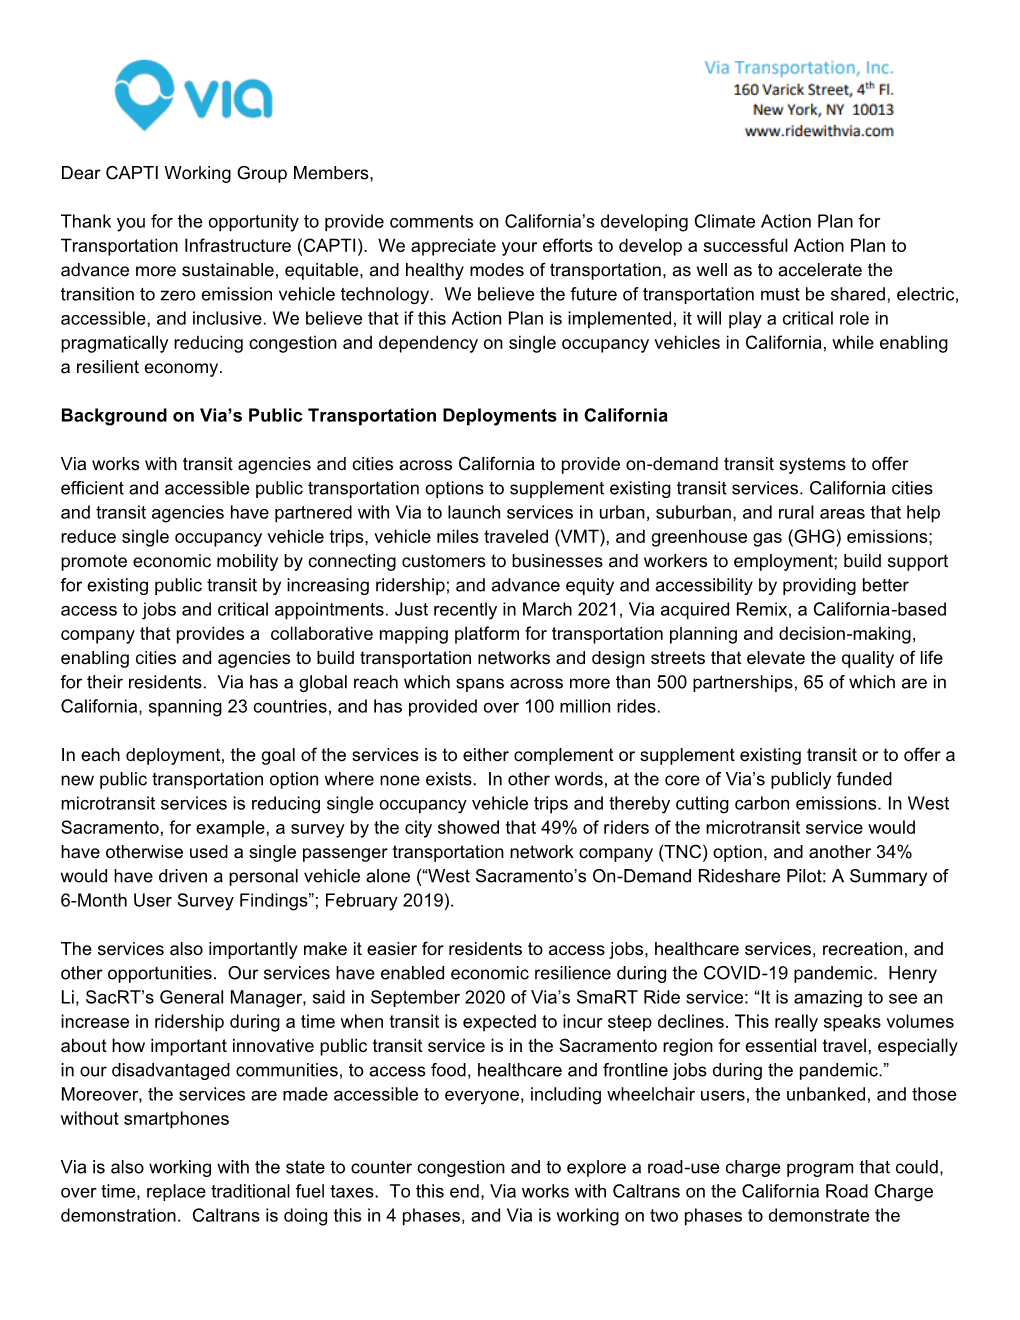 Via Transportation Inc. Letter to CAPTI Working Group